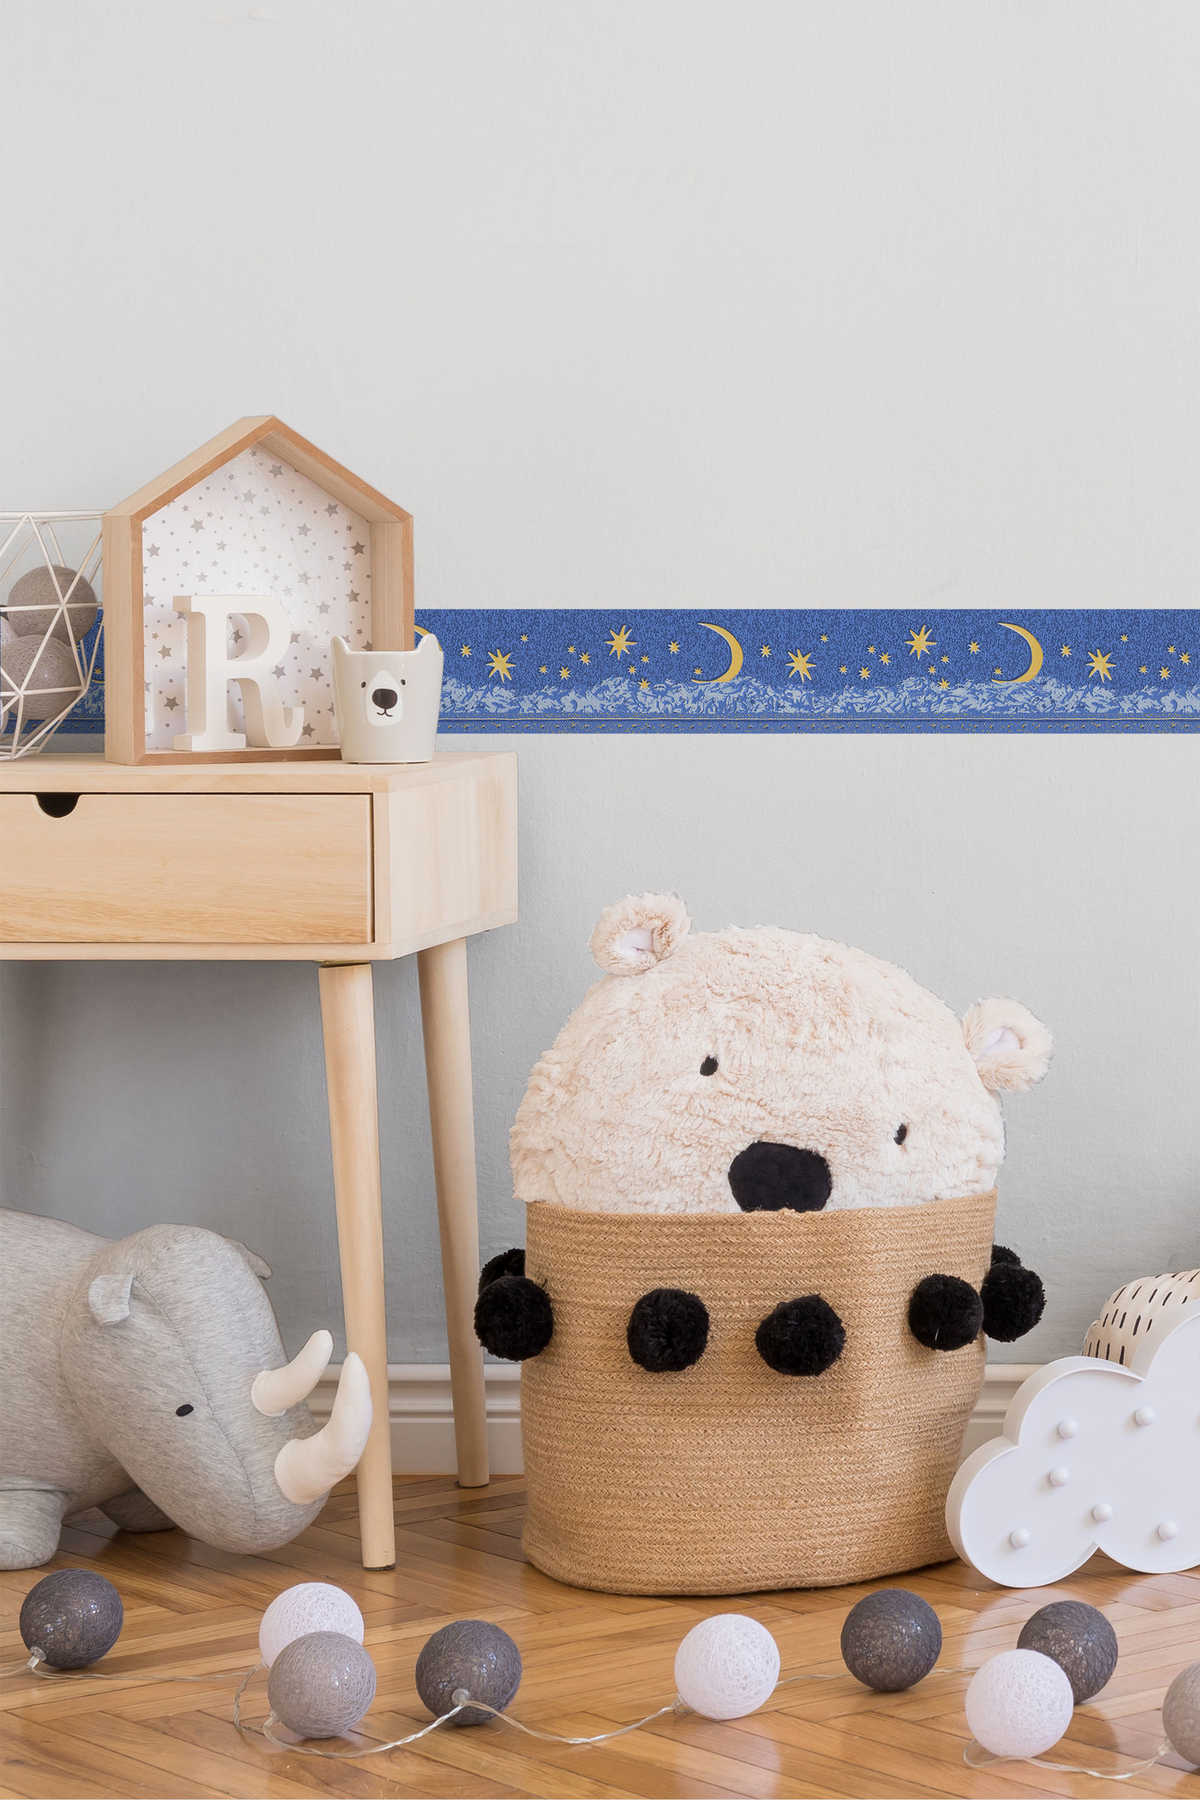             Wallpaper border with starry sky & moons - blue, yellow
        